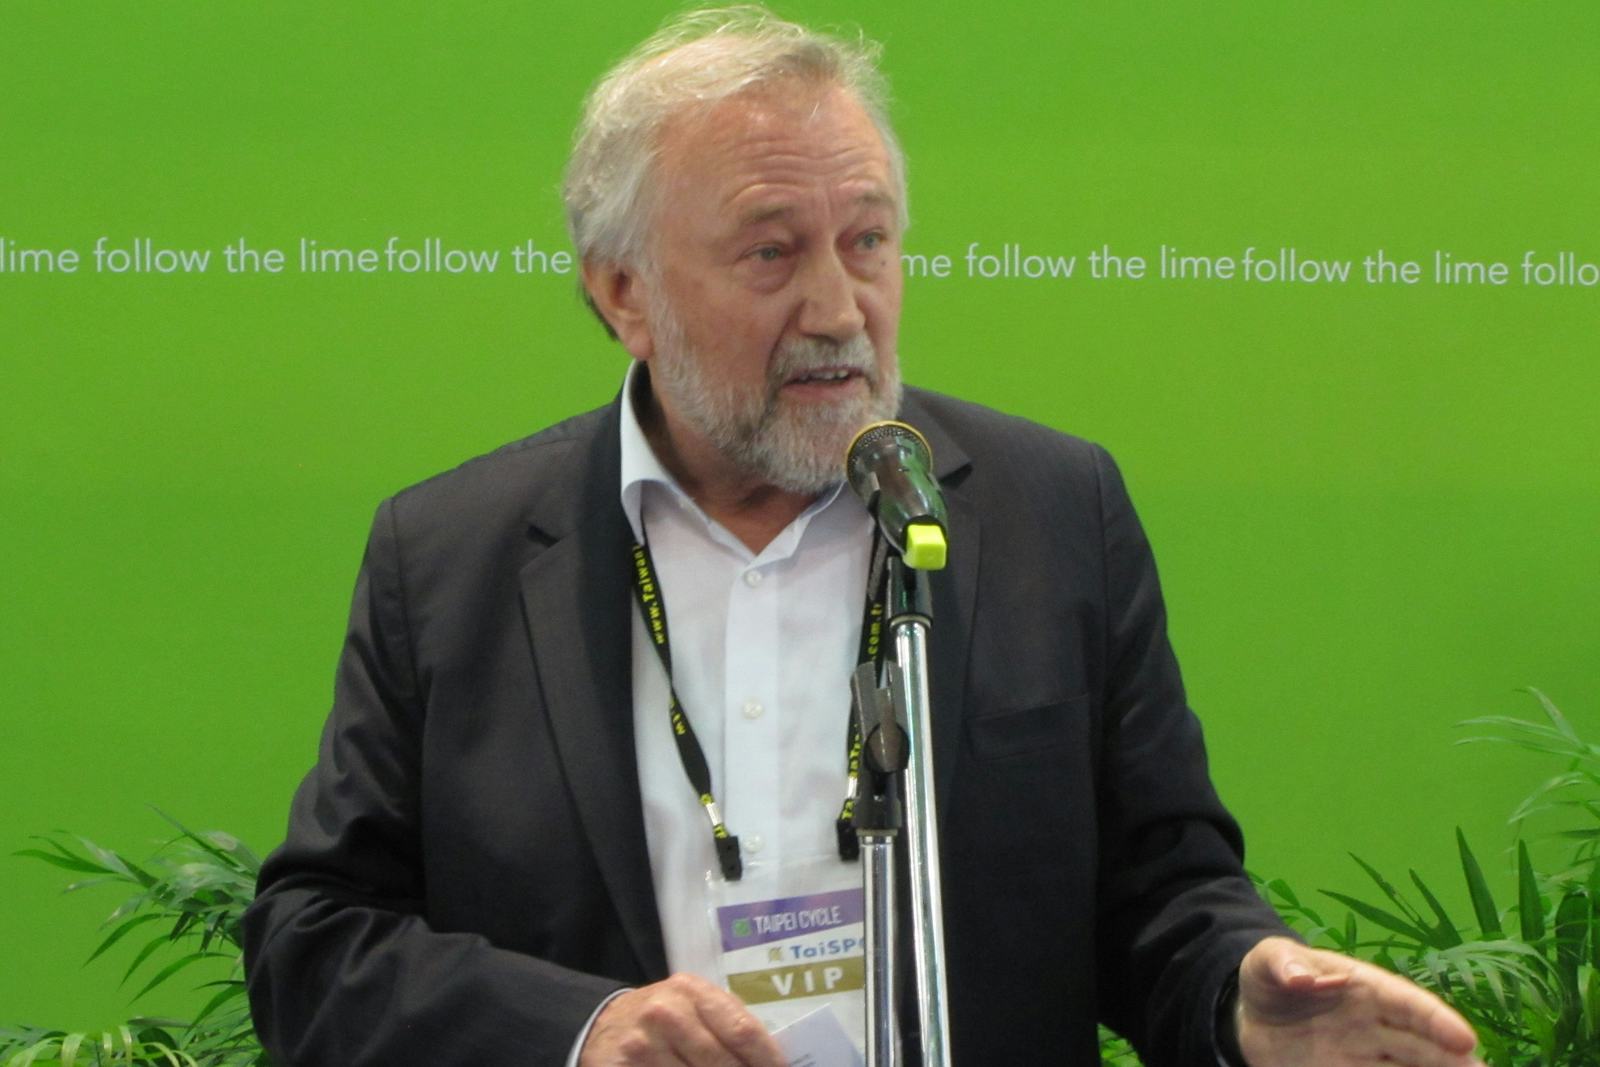 At Taipei Cycle Manfred Neun, President of the European Cyclists' Federation, called for a closer cooperation between the bicycle industry and the Cycling Industry Club to improve cycling advocacy. – Photo Bike Europe